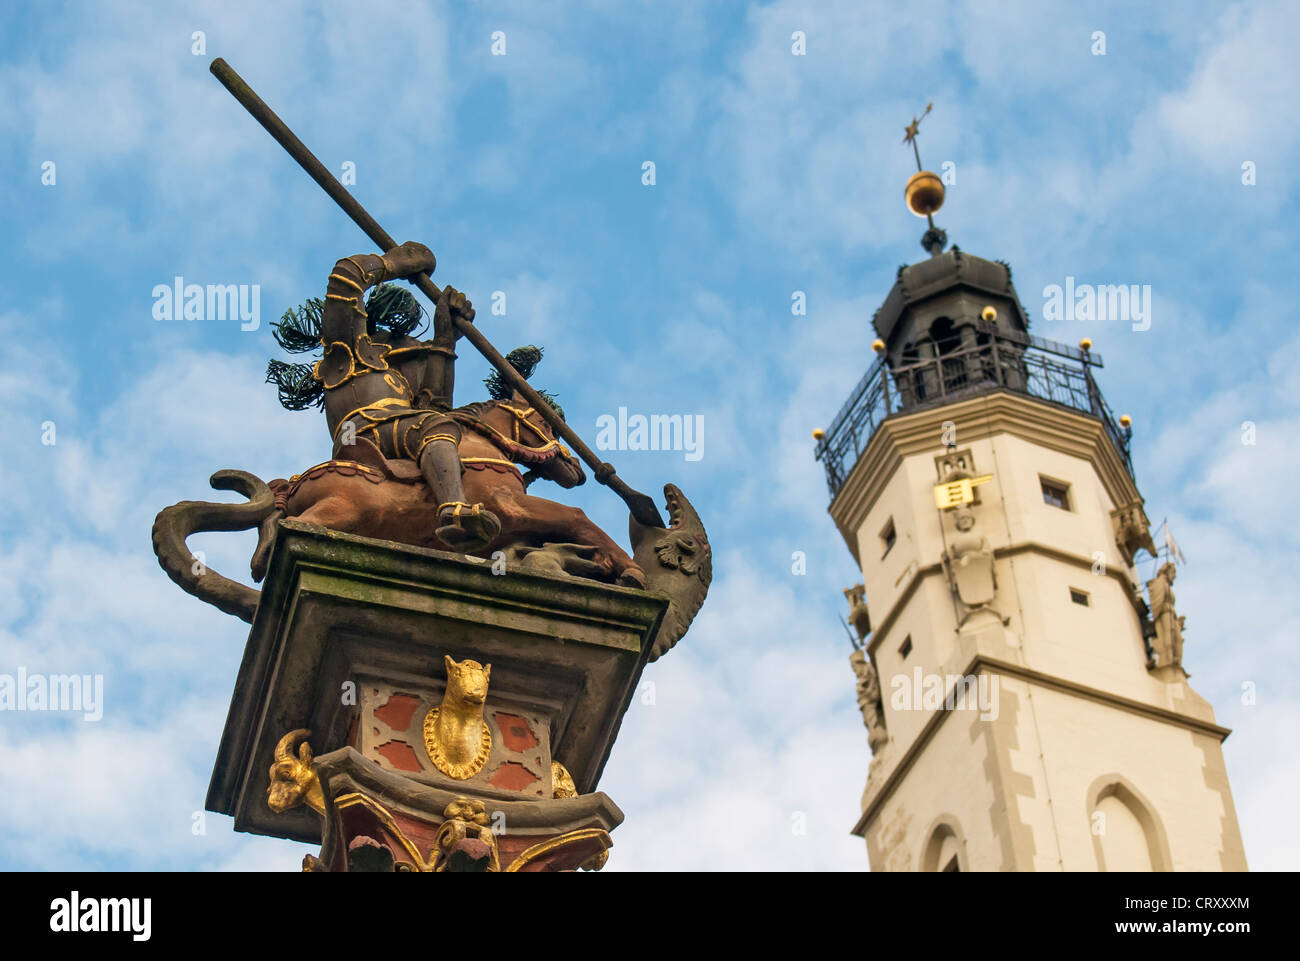 Column of St. George Fountain and Rathaus (Town Hall) Tower, Rothenburg ob der Tauber, Germany Stock Photo